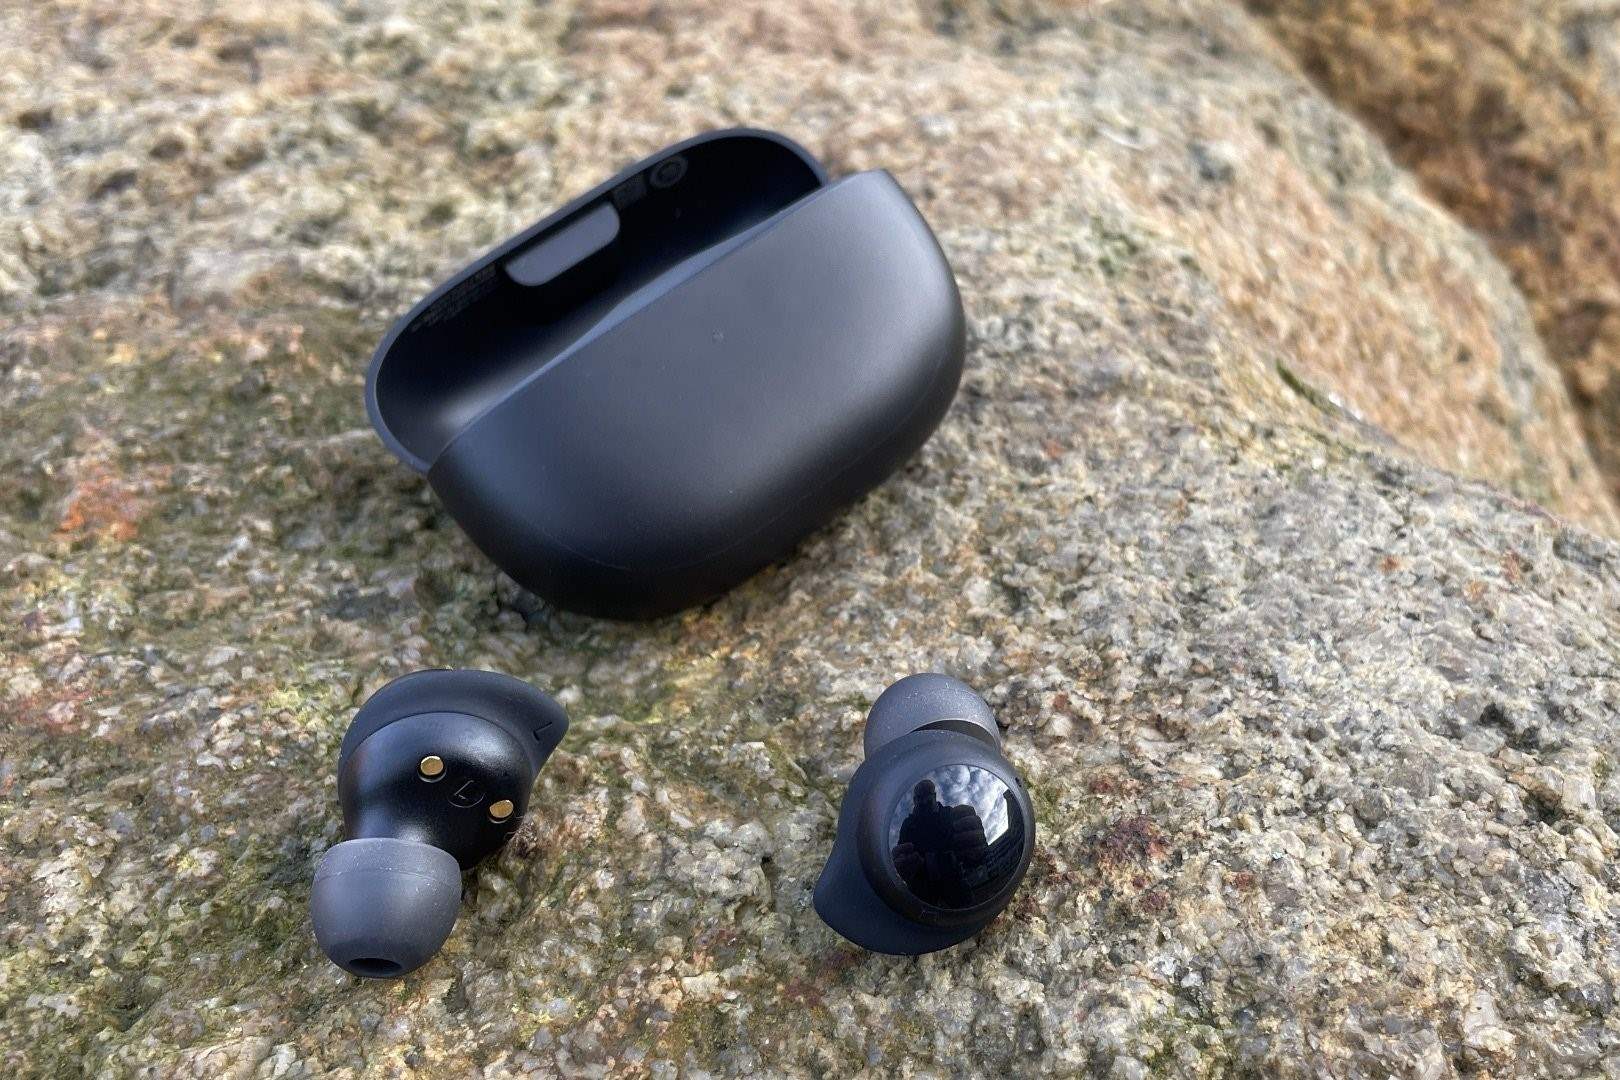 Connecting Redmi Earbuds: A Quick Pairing Guide